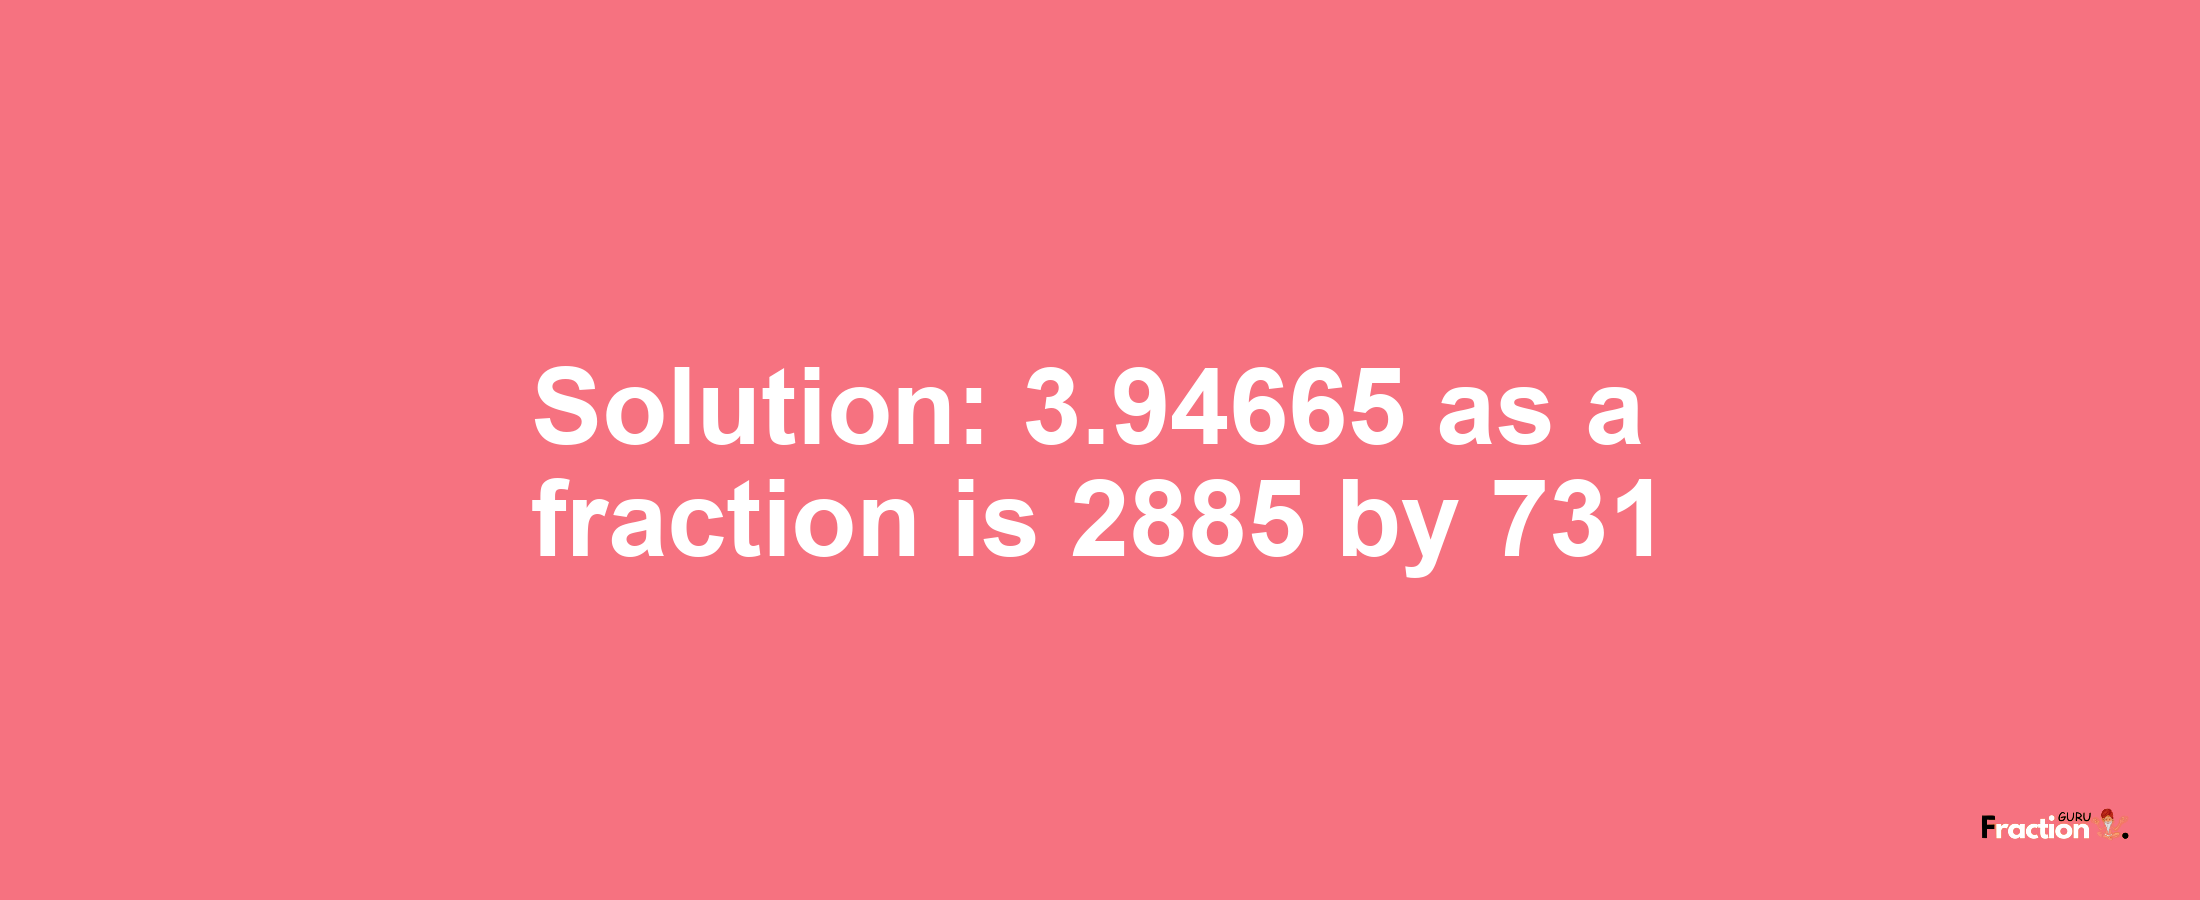 Solution:3.94665 as a fraction is 2885/731